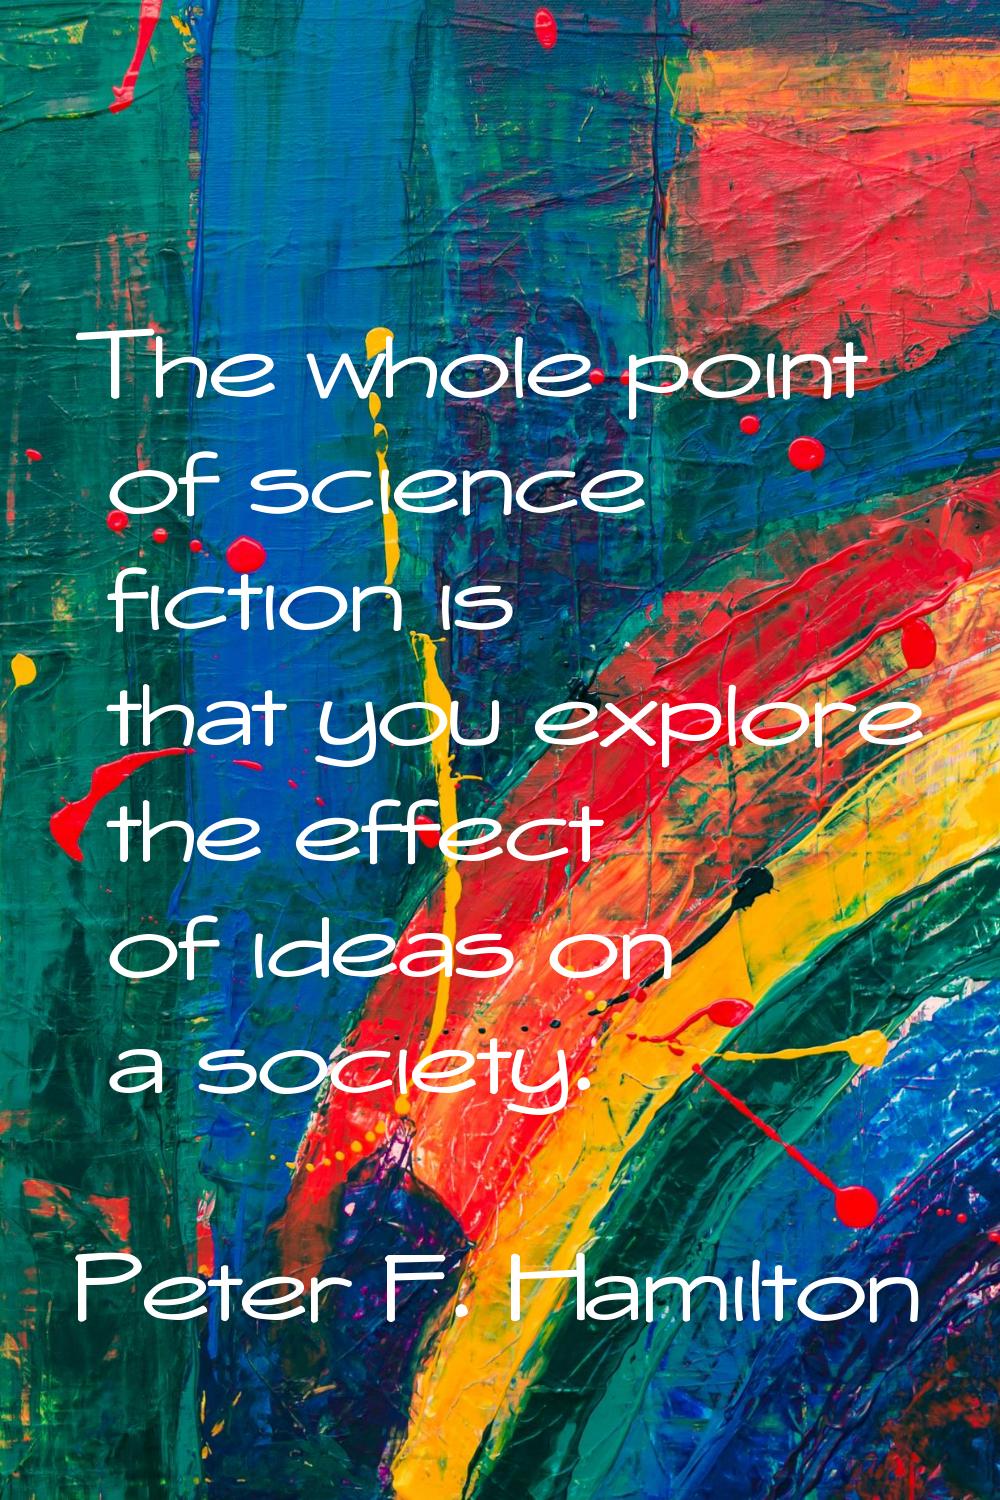 The whole point of science fiction is that you explore the effect of ideas on a society.